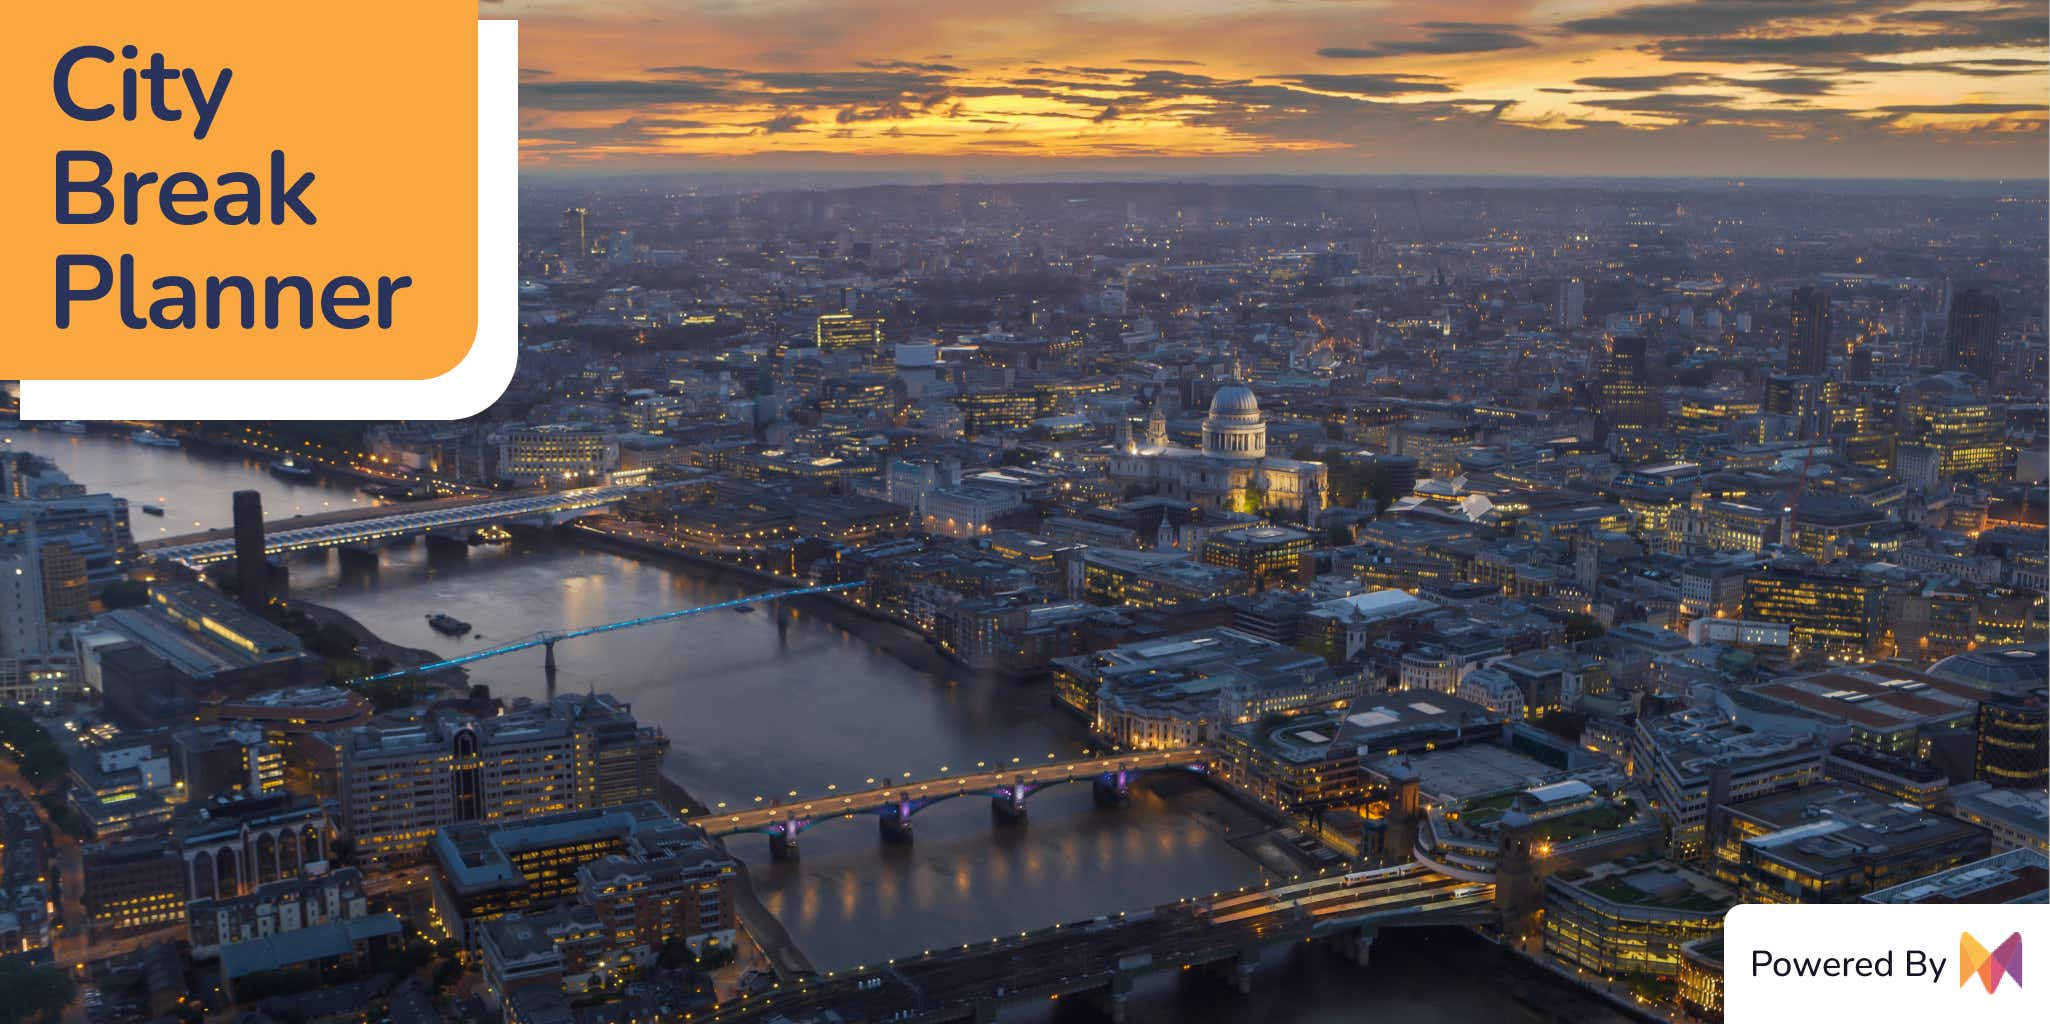 birdseye view of london during sunset with the title 'city break planner'